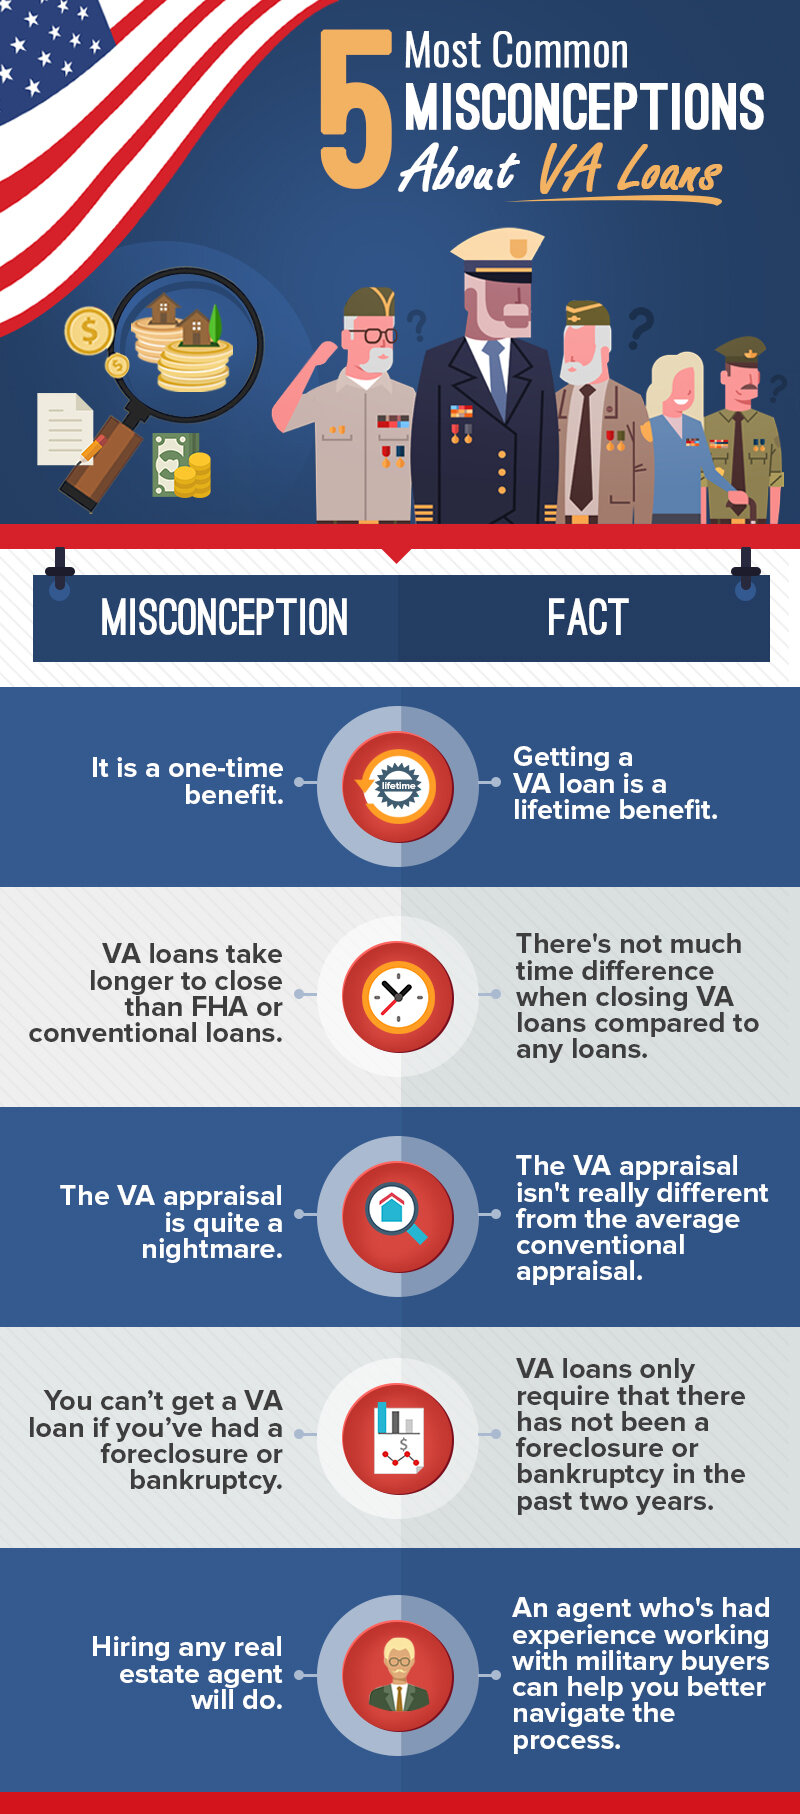 5 Most Common Misconceptions About VA Loans